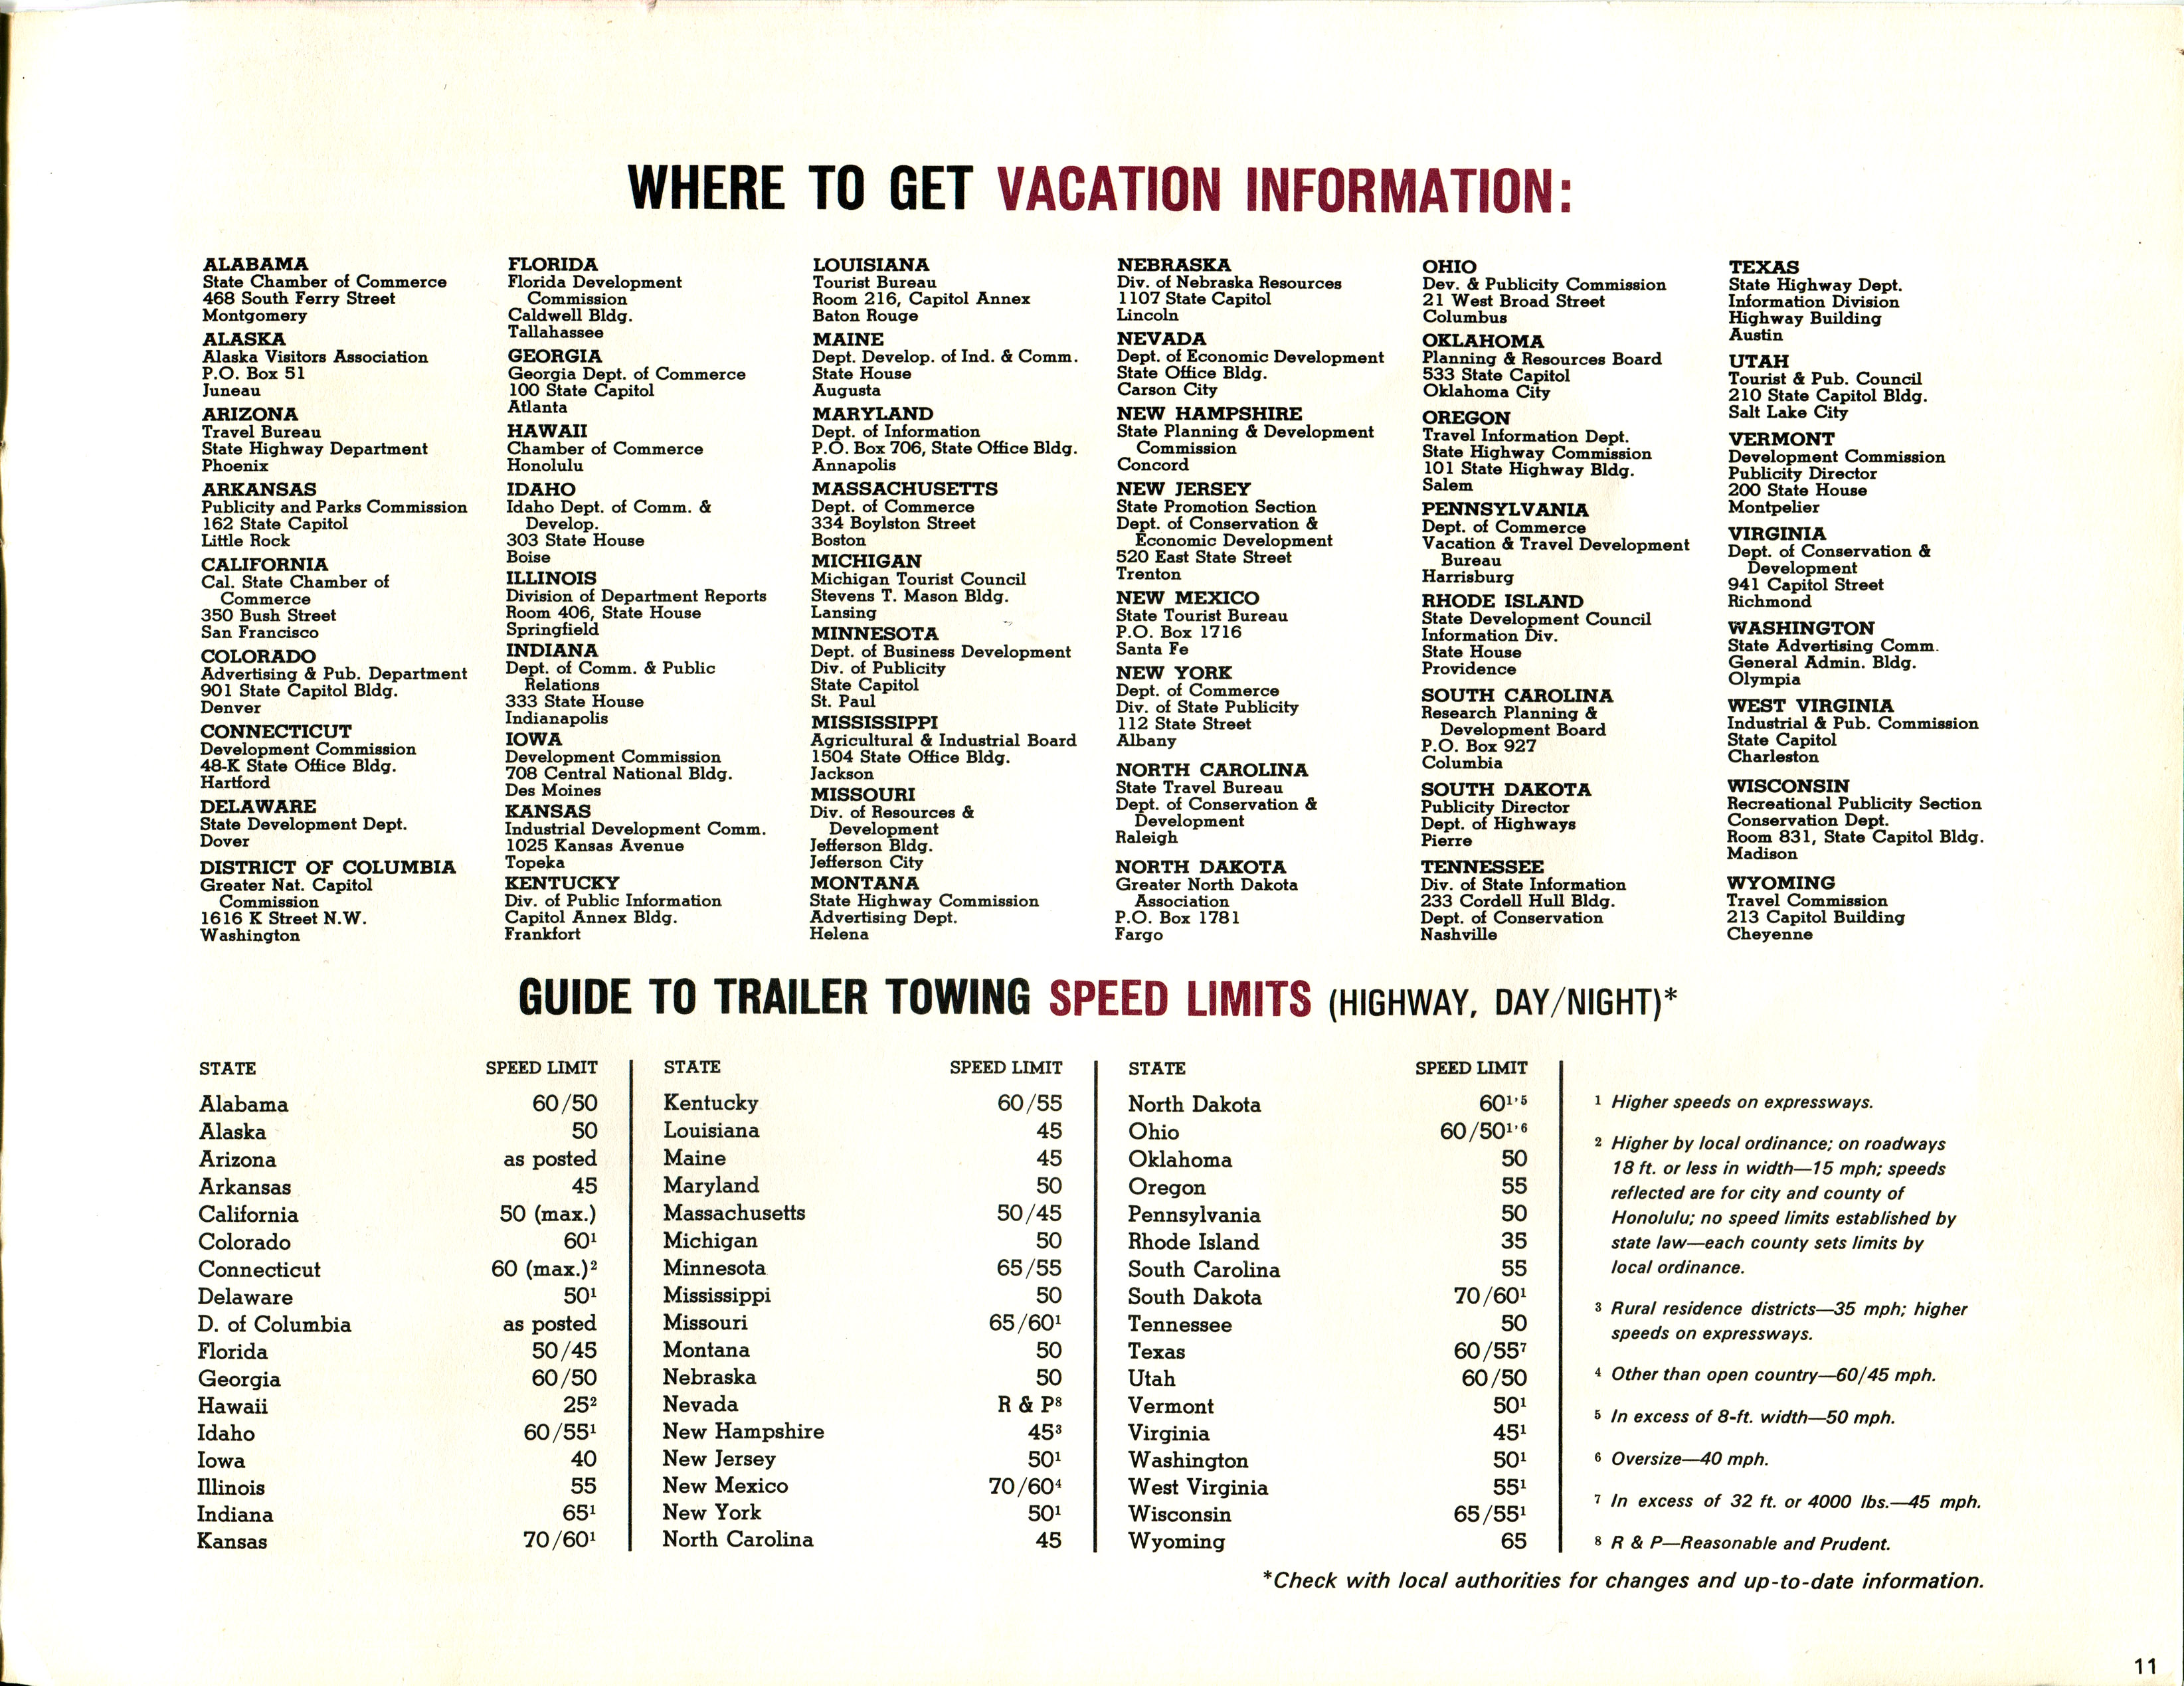 1966_OLDSMOBILE_Trailering_Guide_Page_11